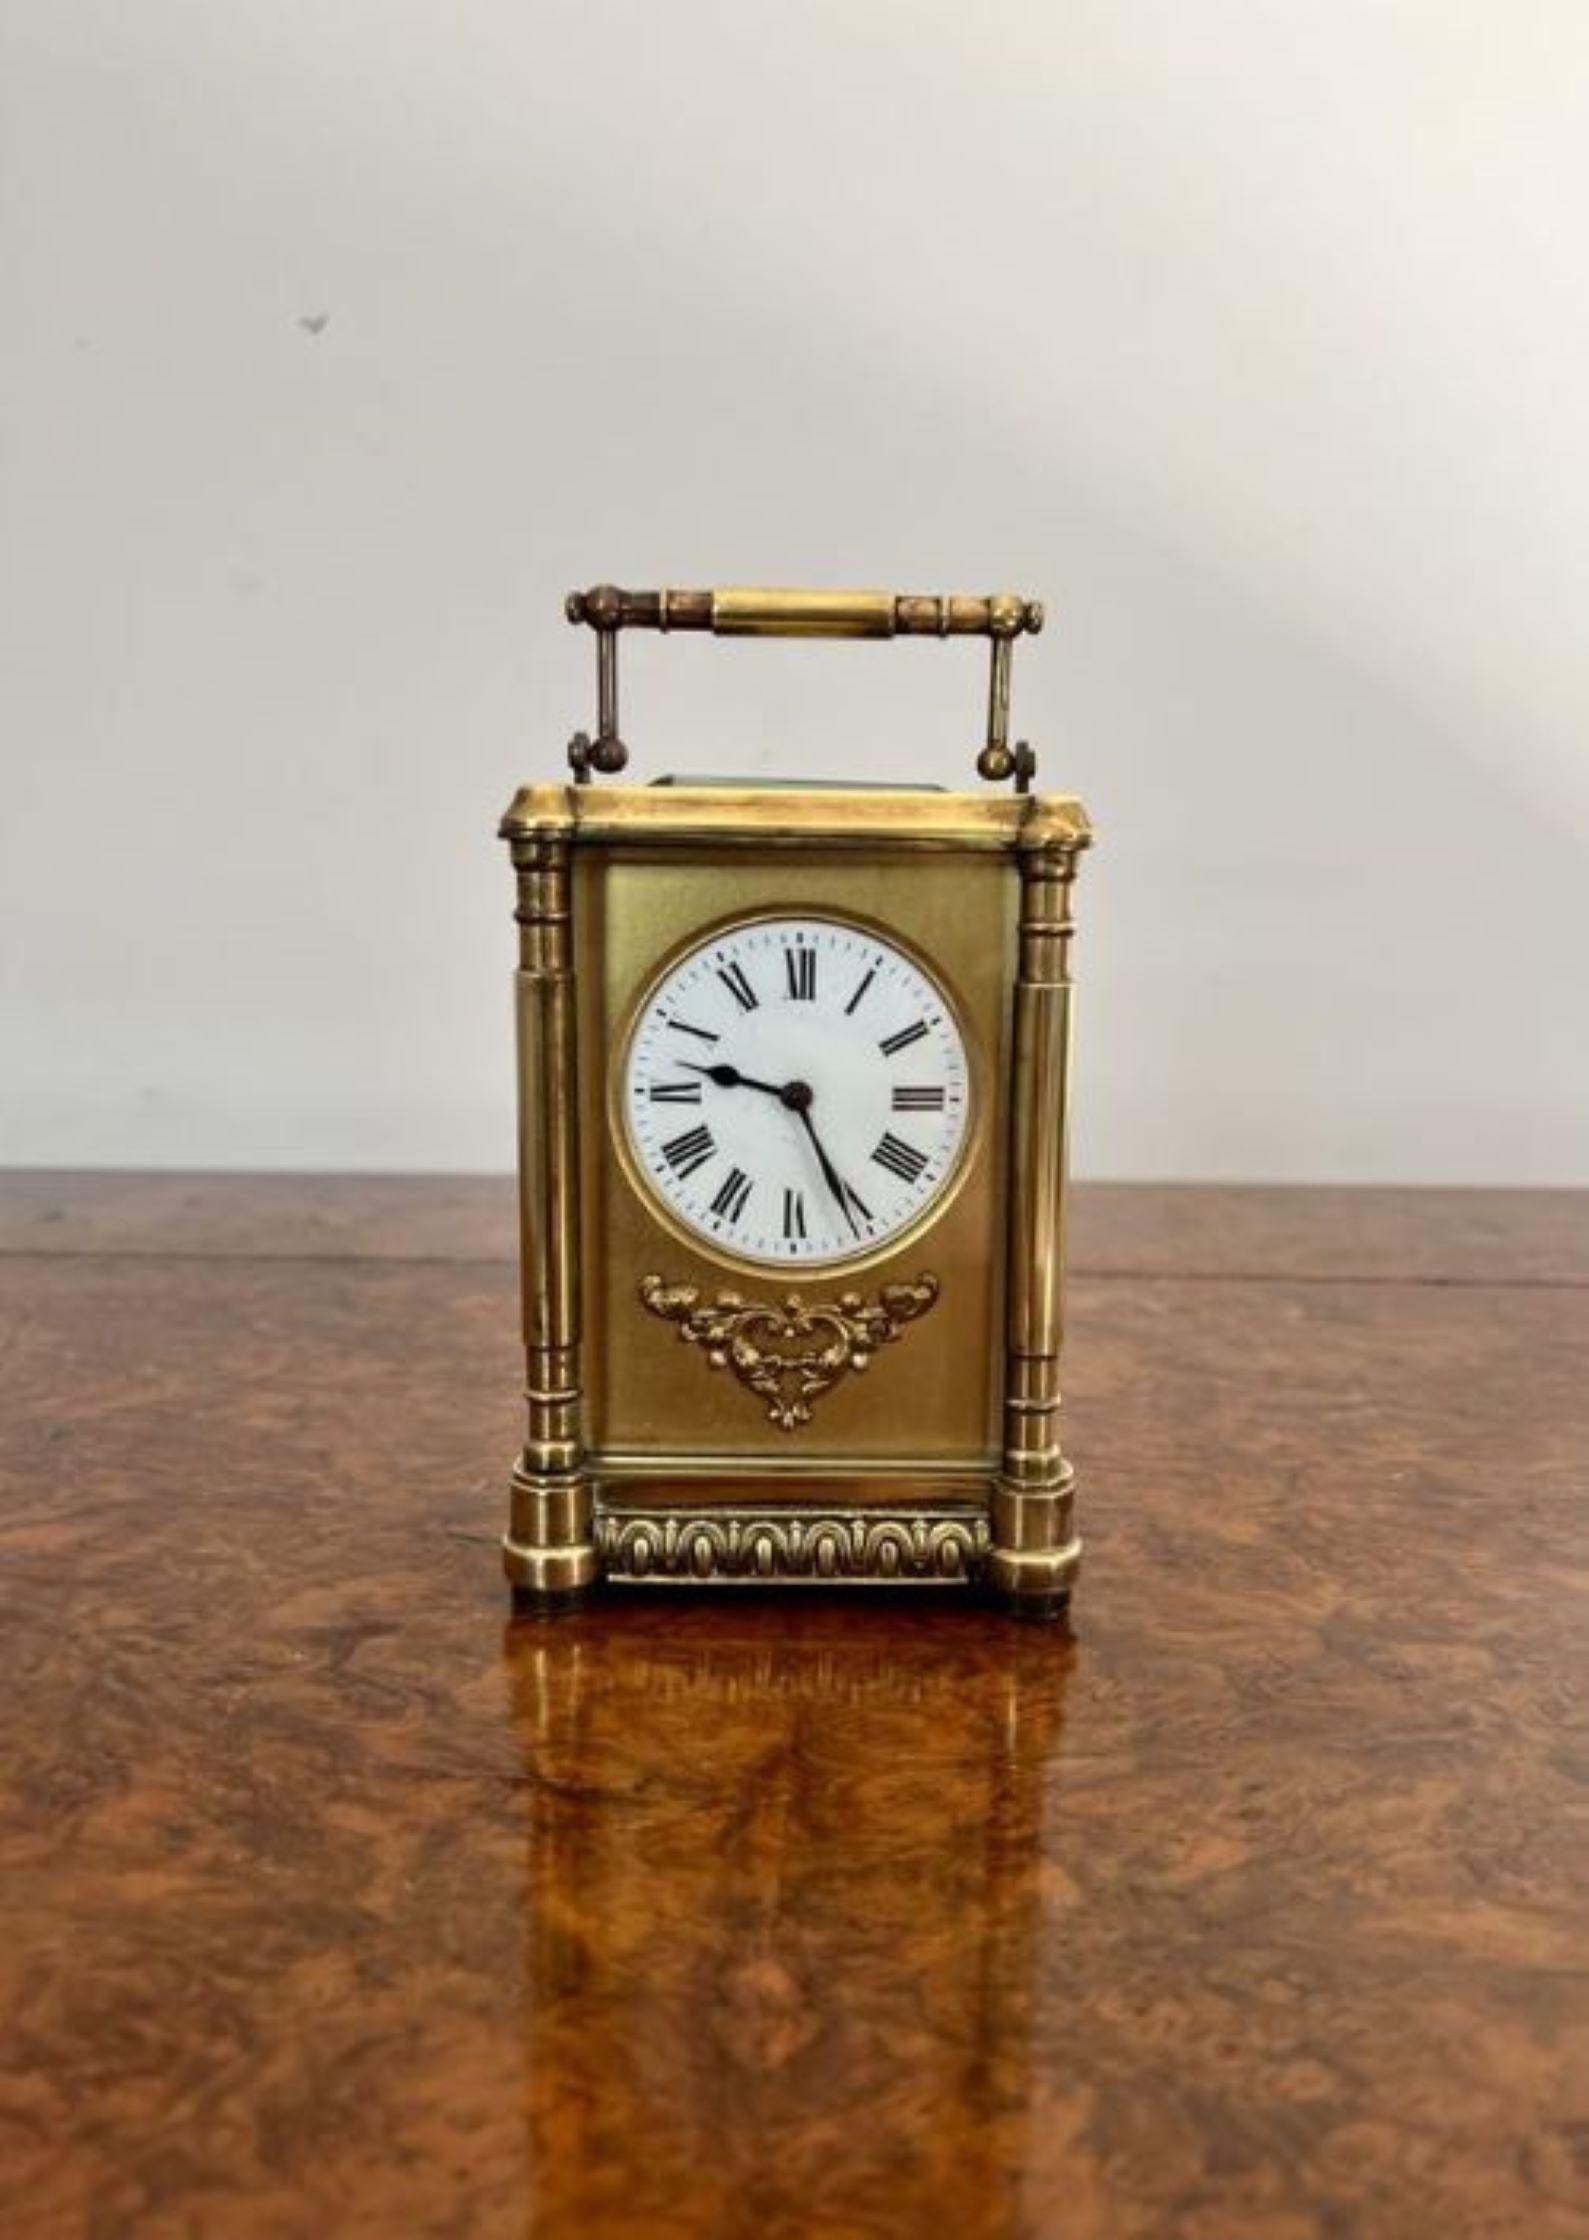 Fantastic quality large antique Victorian quality ornate brass carriage clock having a quality eight day French movement in an ornate brass case with turned columns to the corners, white porcelain dial with brass ornate detail underneath.
Please